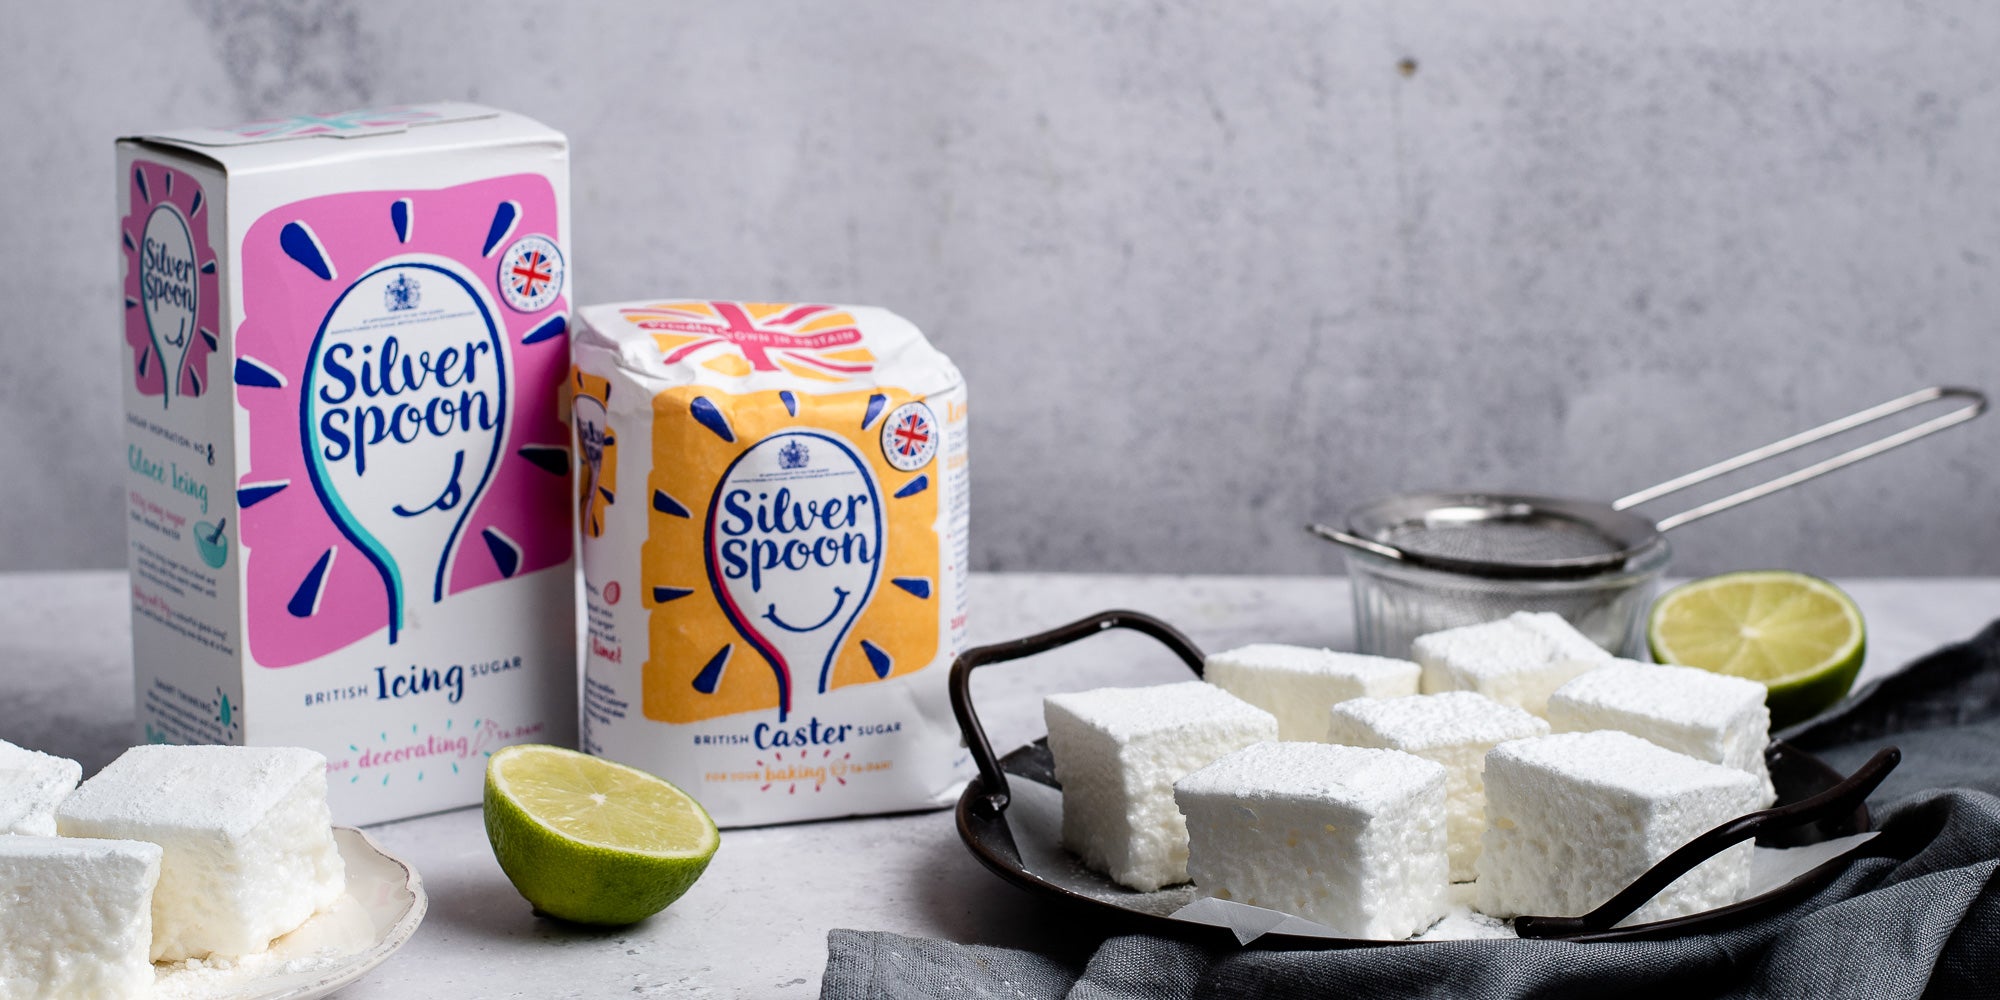 Gin & Tonic Marshmallows next to Silver Spoon Caster and Icing sugar, with sliced lime